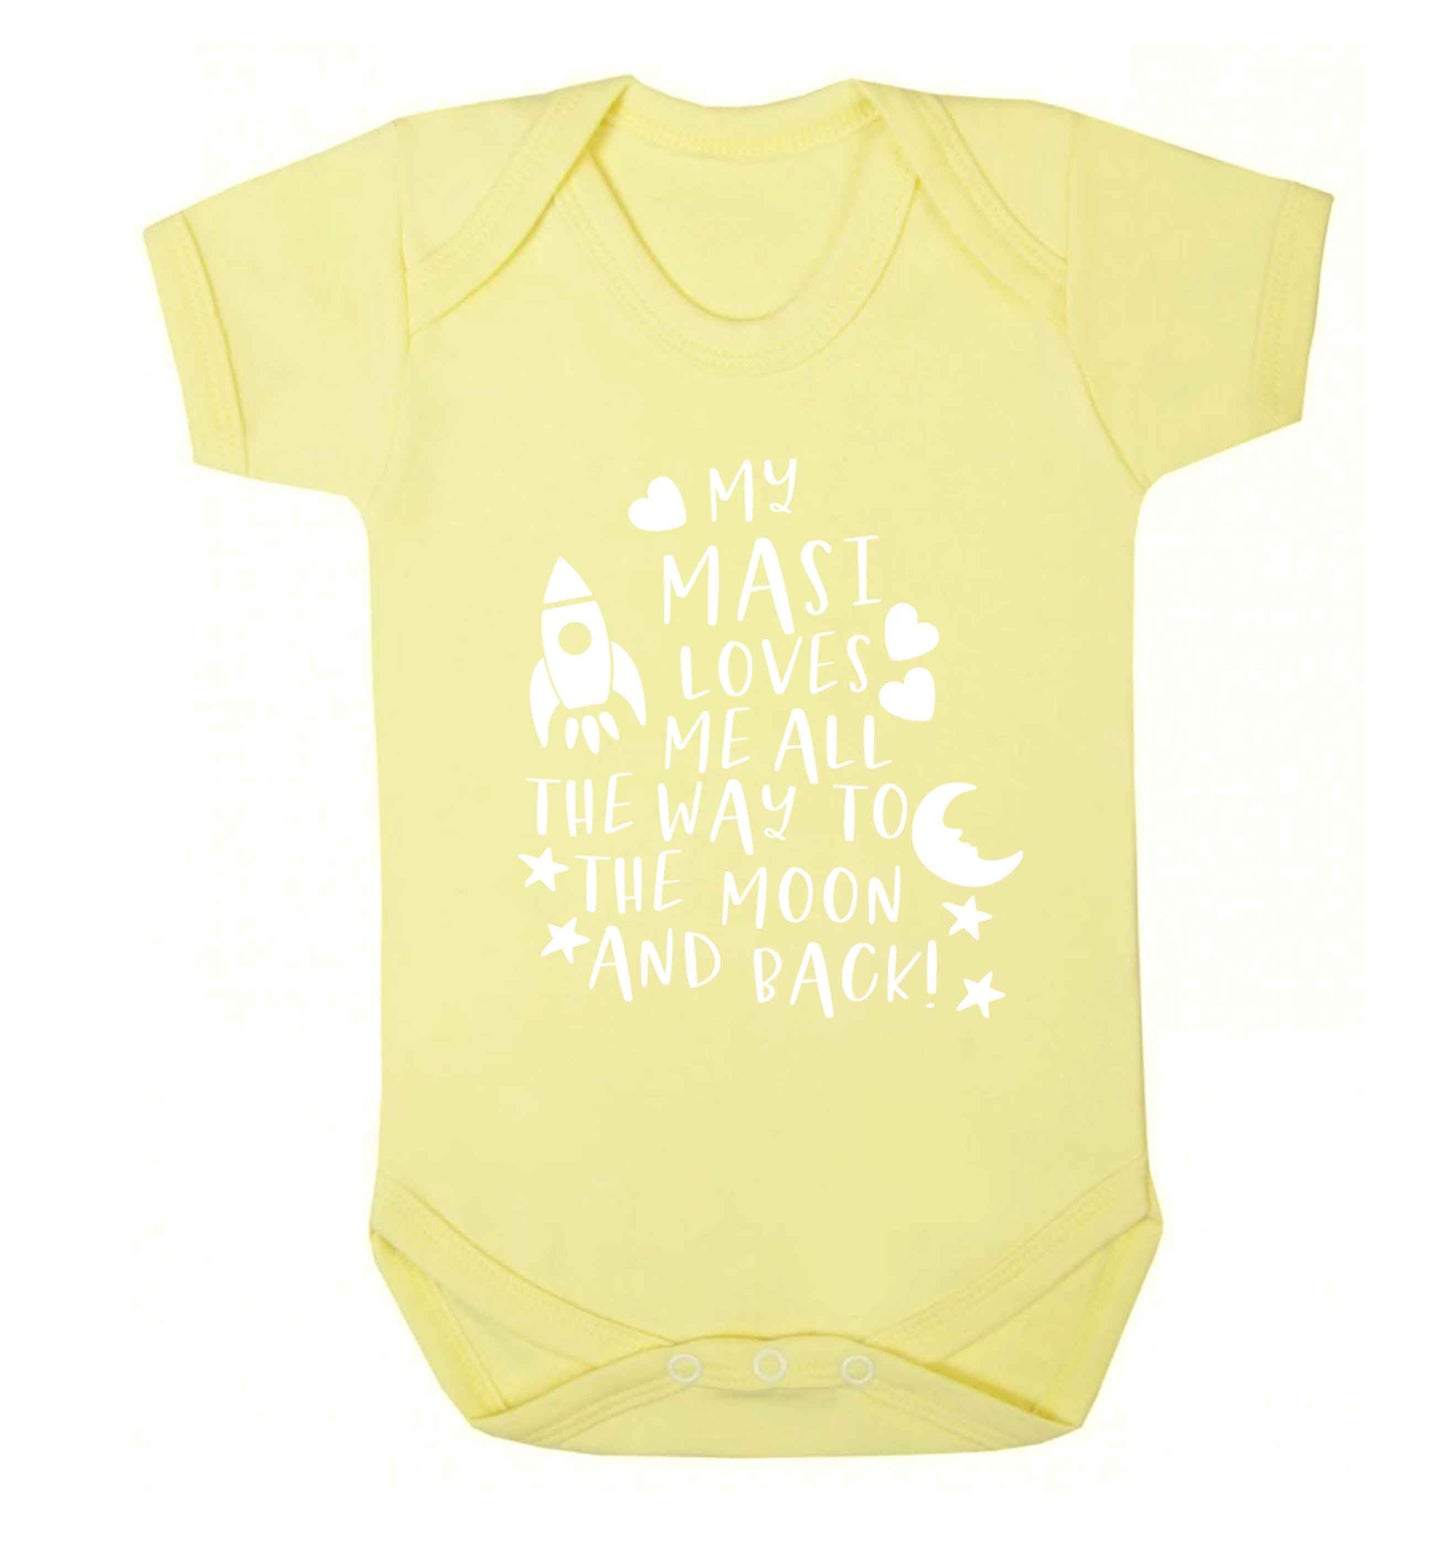 My masi loves me all the way to the moon and back Baby Vest pale yellow 18-24 months